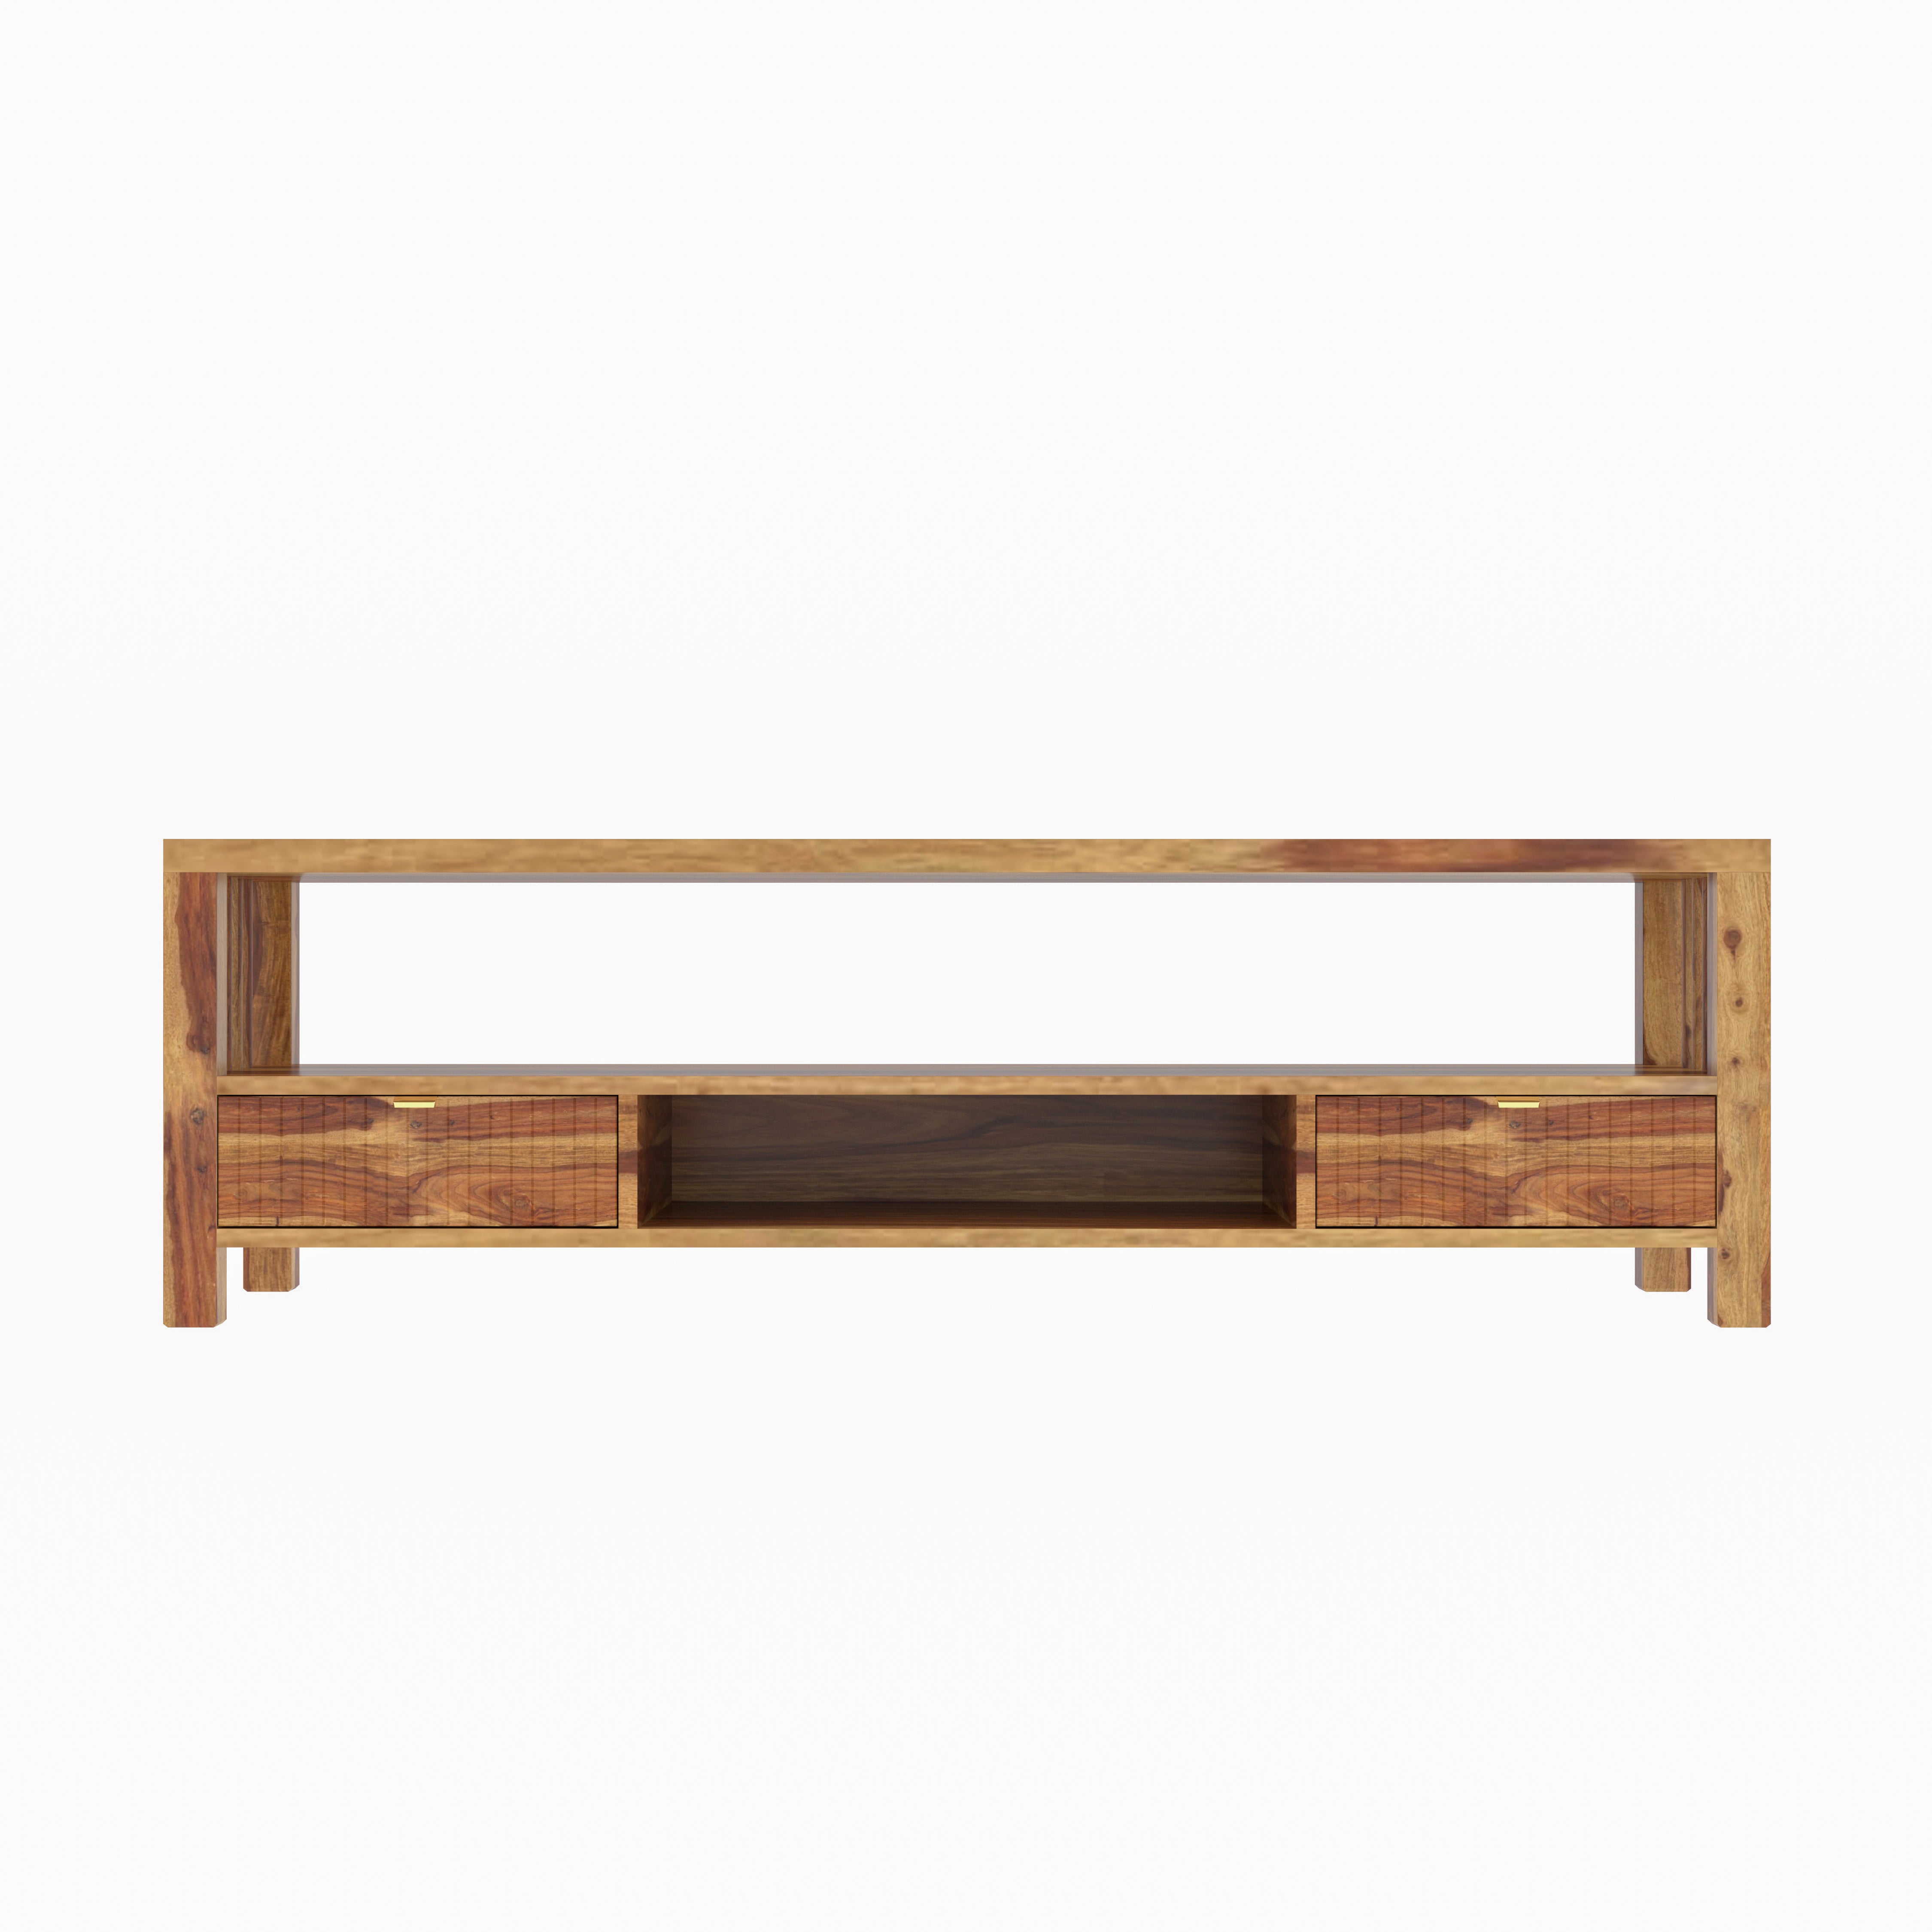 Antique Aesthetic Light Finished Wooden Handmade TV Stand Tv stand